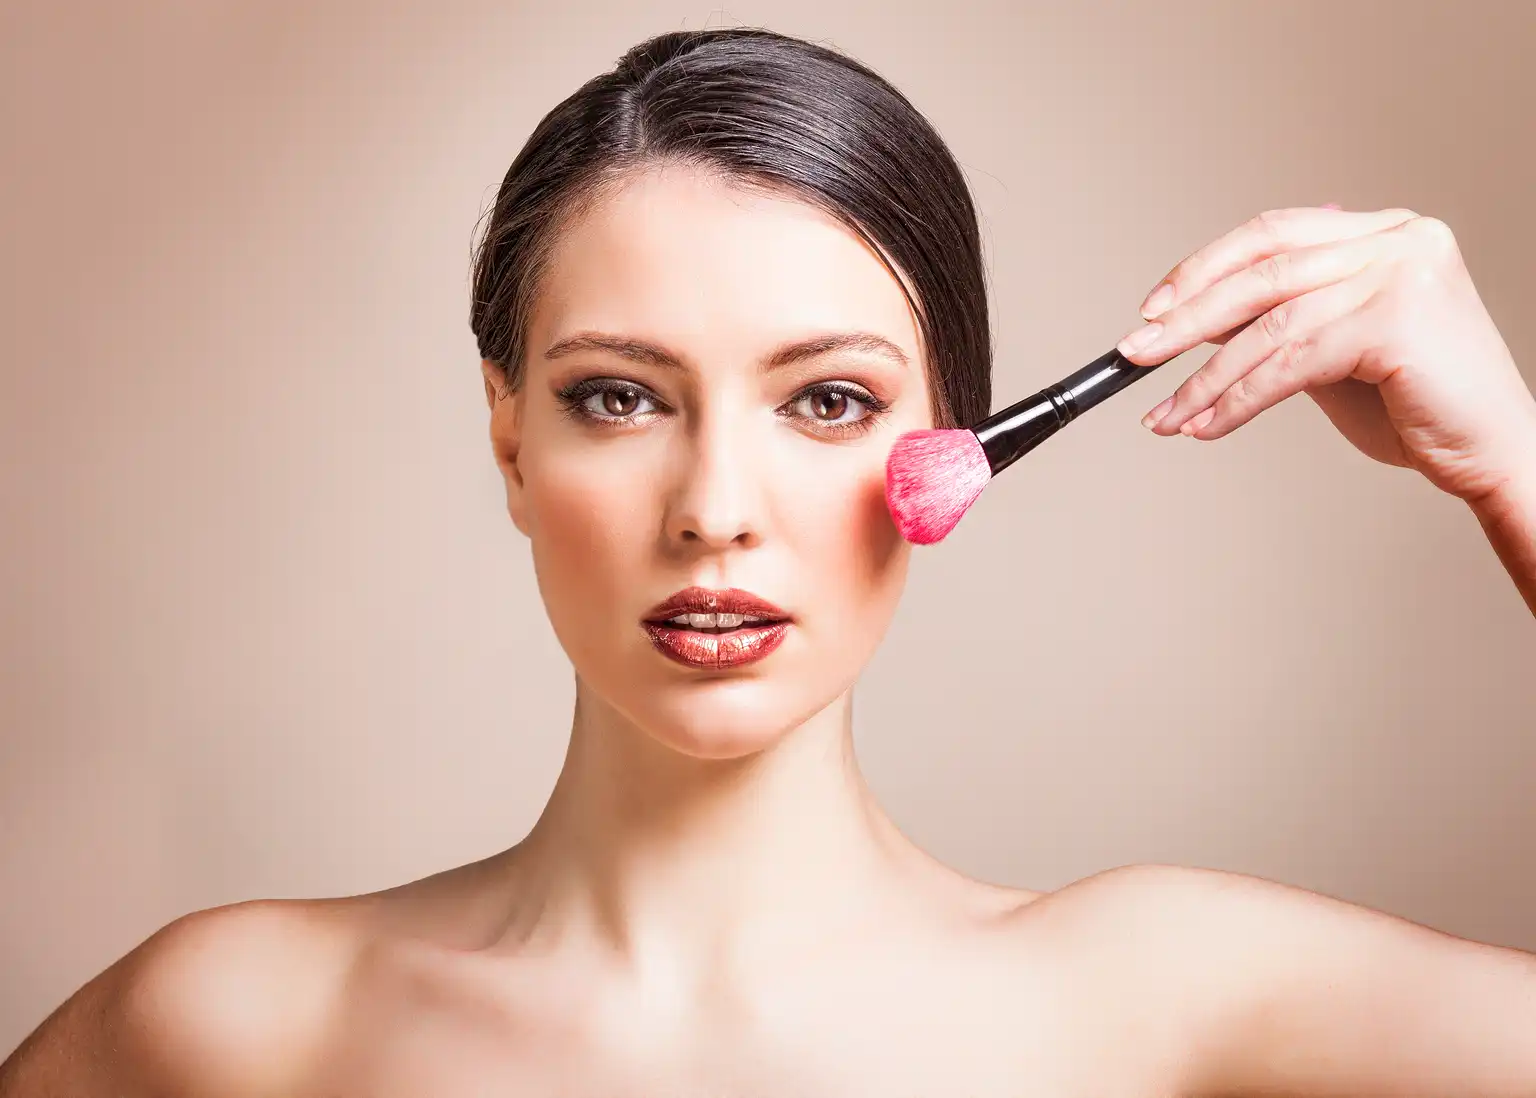 Sally Beauty: This Undervalued Stock Could Surprise To The Upside - Seeking Alpha